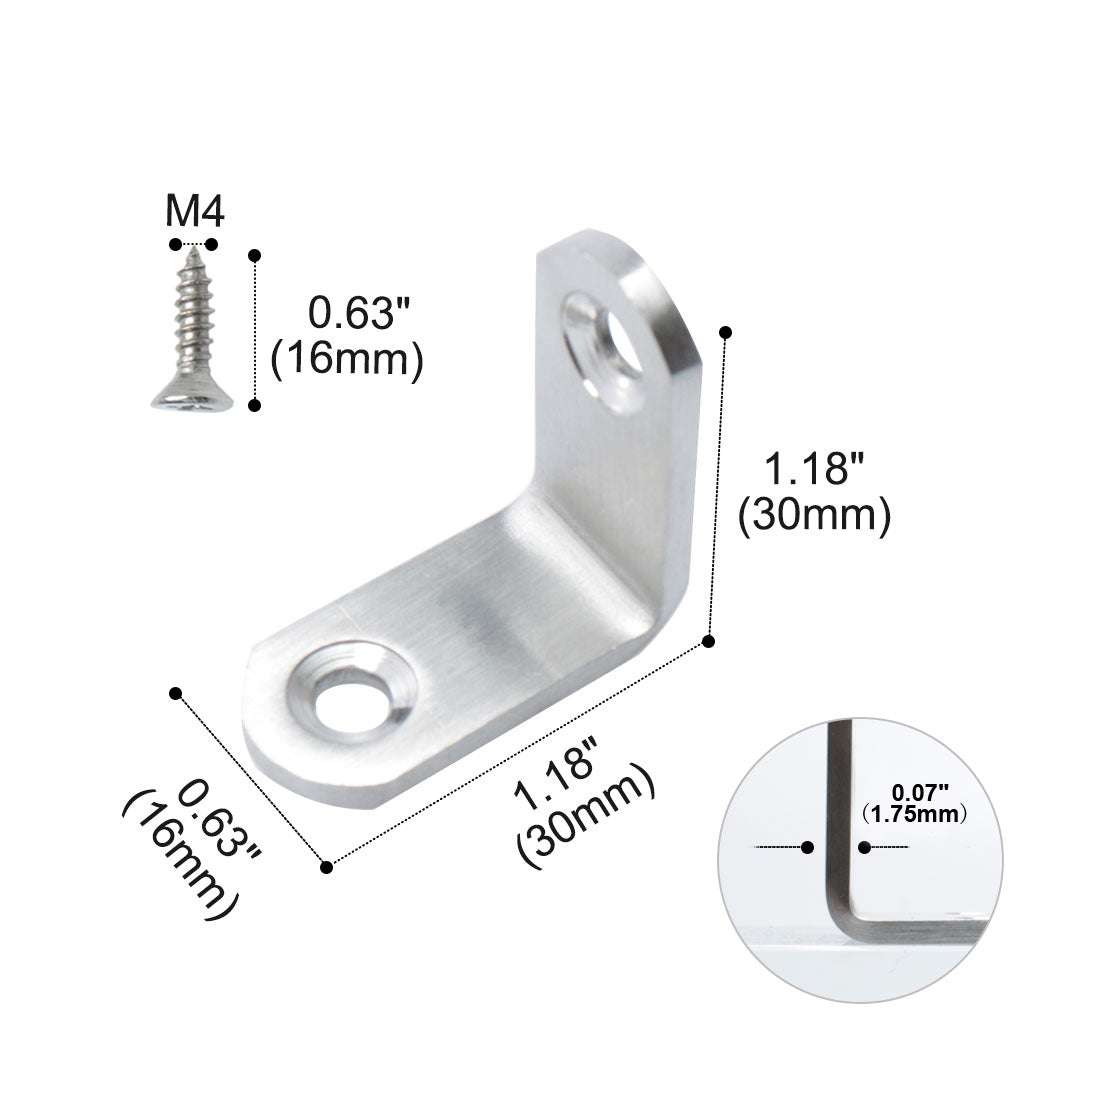 uxcell Uxcell Angle Bracket Stainless Steel Brace Fastener Support w Screws 30 x 30mm, 2pcs